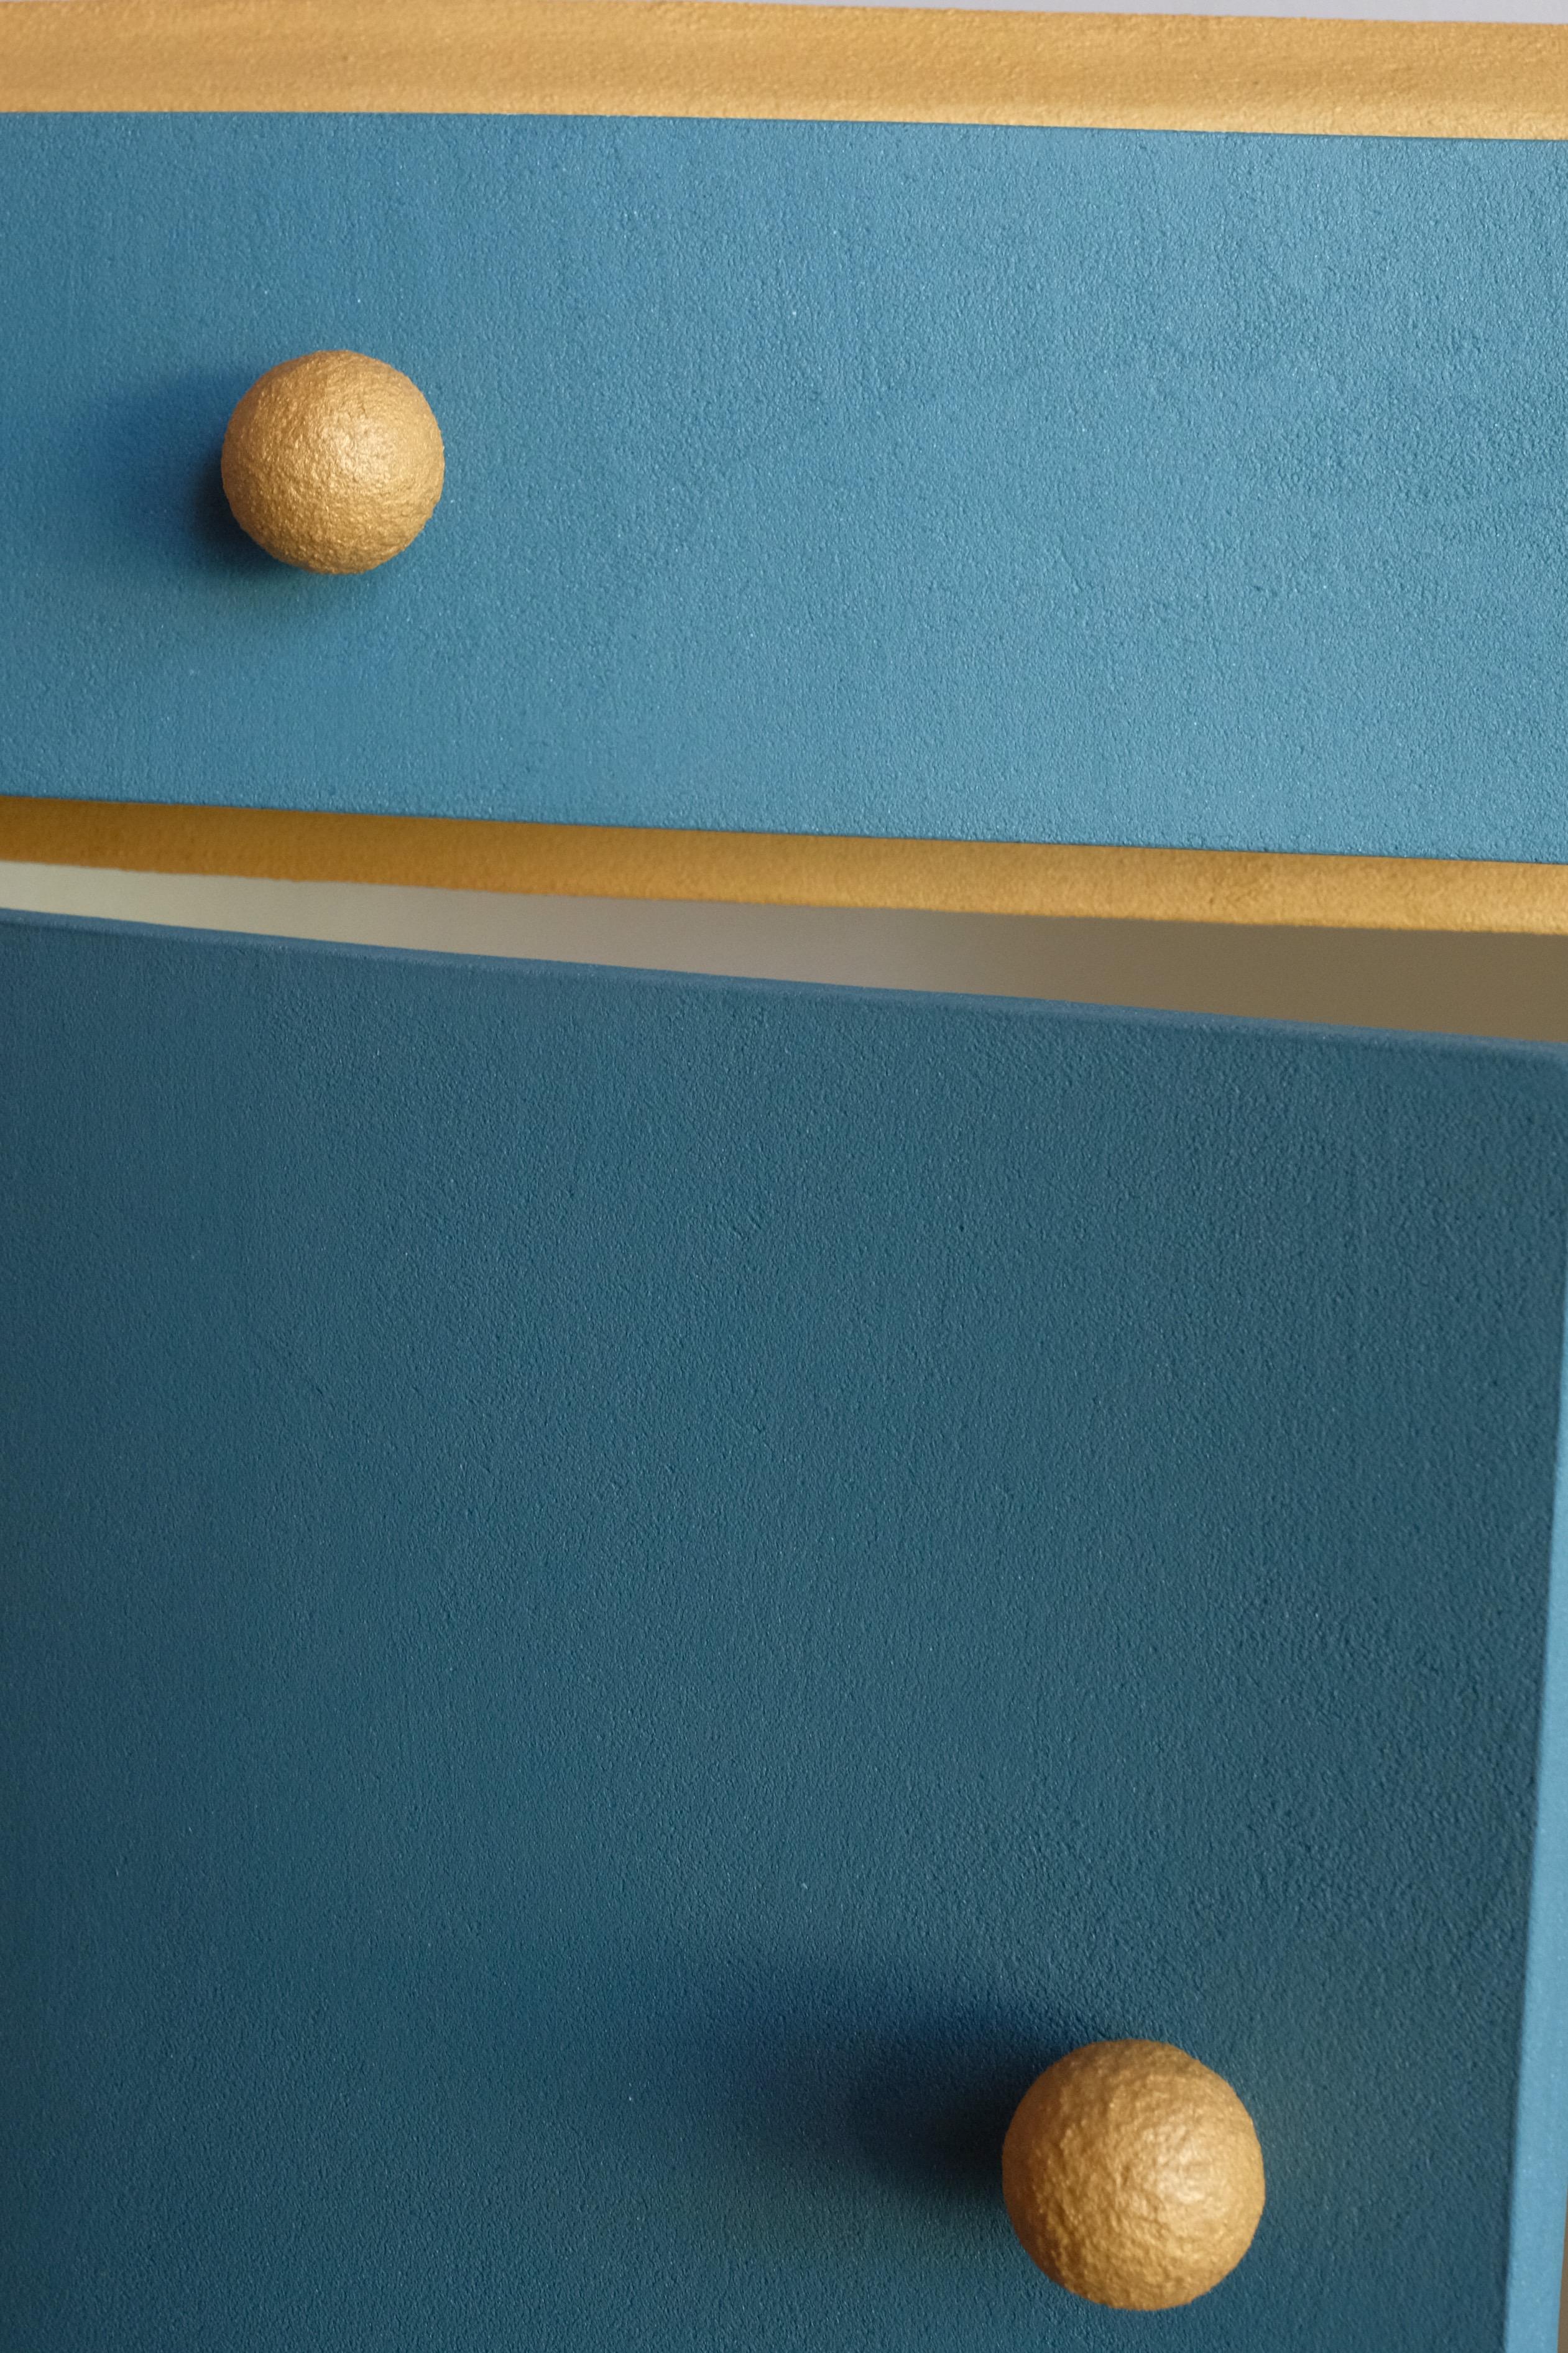 Italian 21st Century Cabinet-Sculpture Contemporary Gold-Blue Colors in Wood and Resin